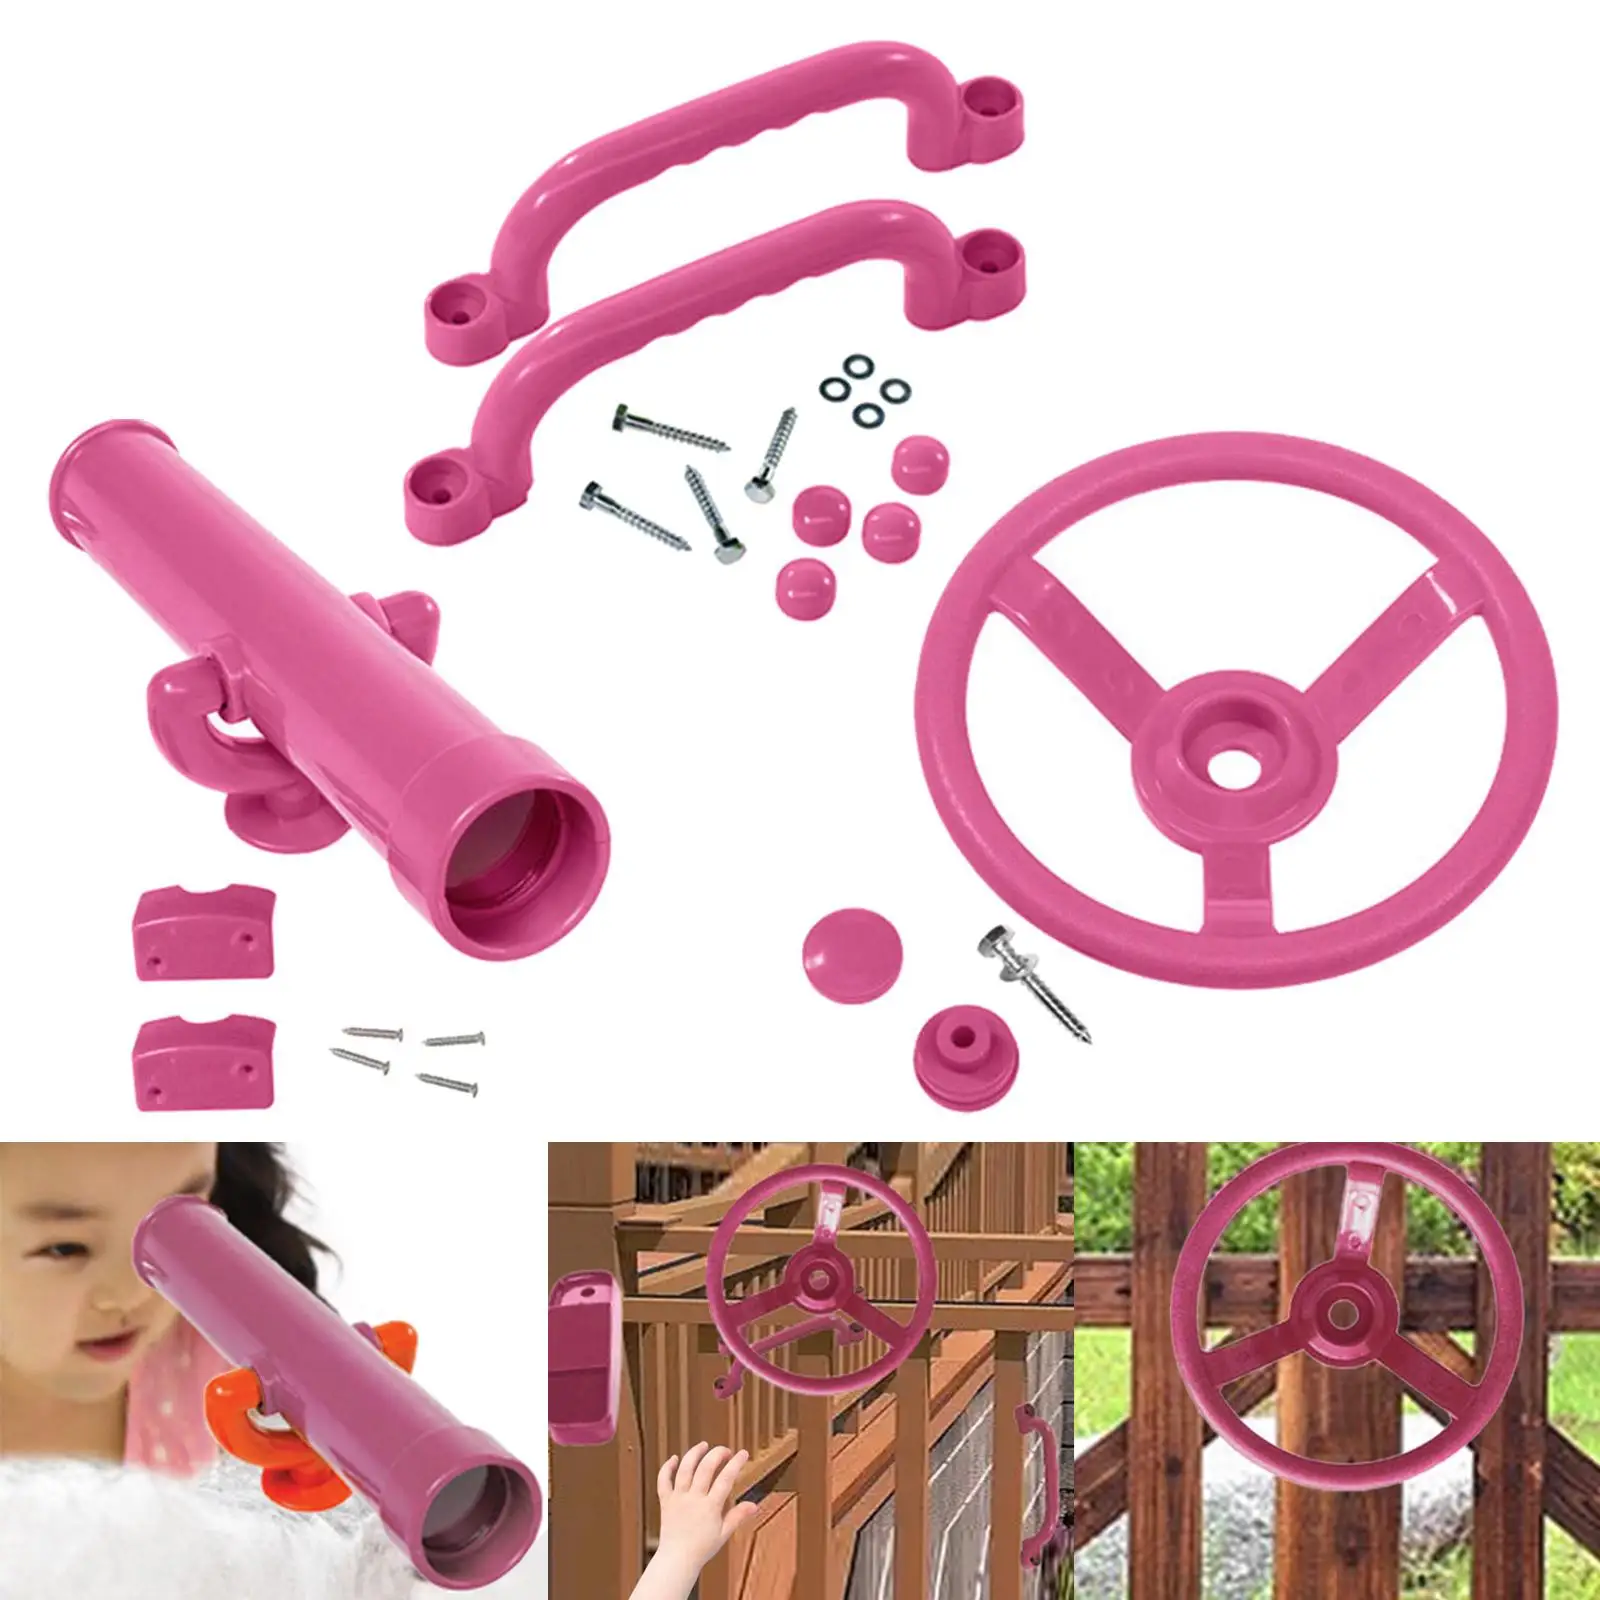 Playground Accessories Pirate Ship Wheel for Kids Valentines Day Gifts for Jungle Gym Tree House Backyard Swingset Attachments